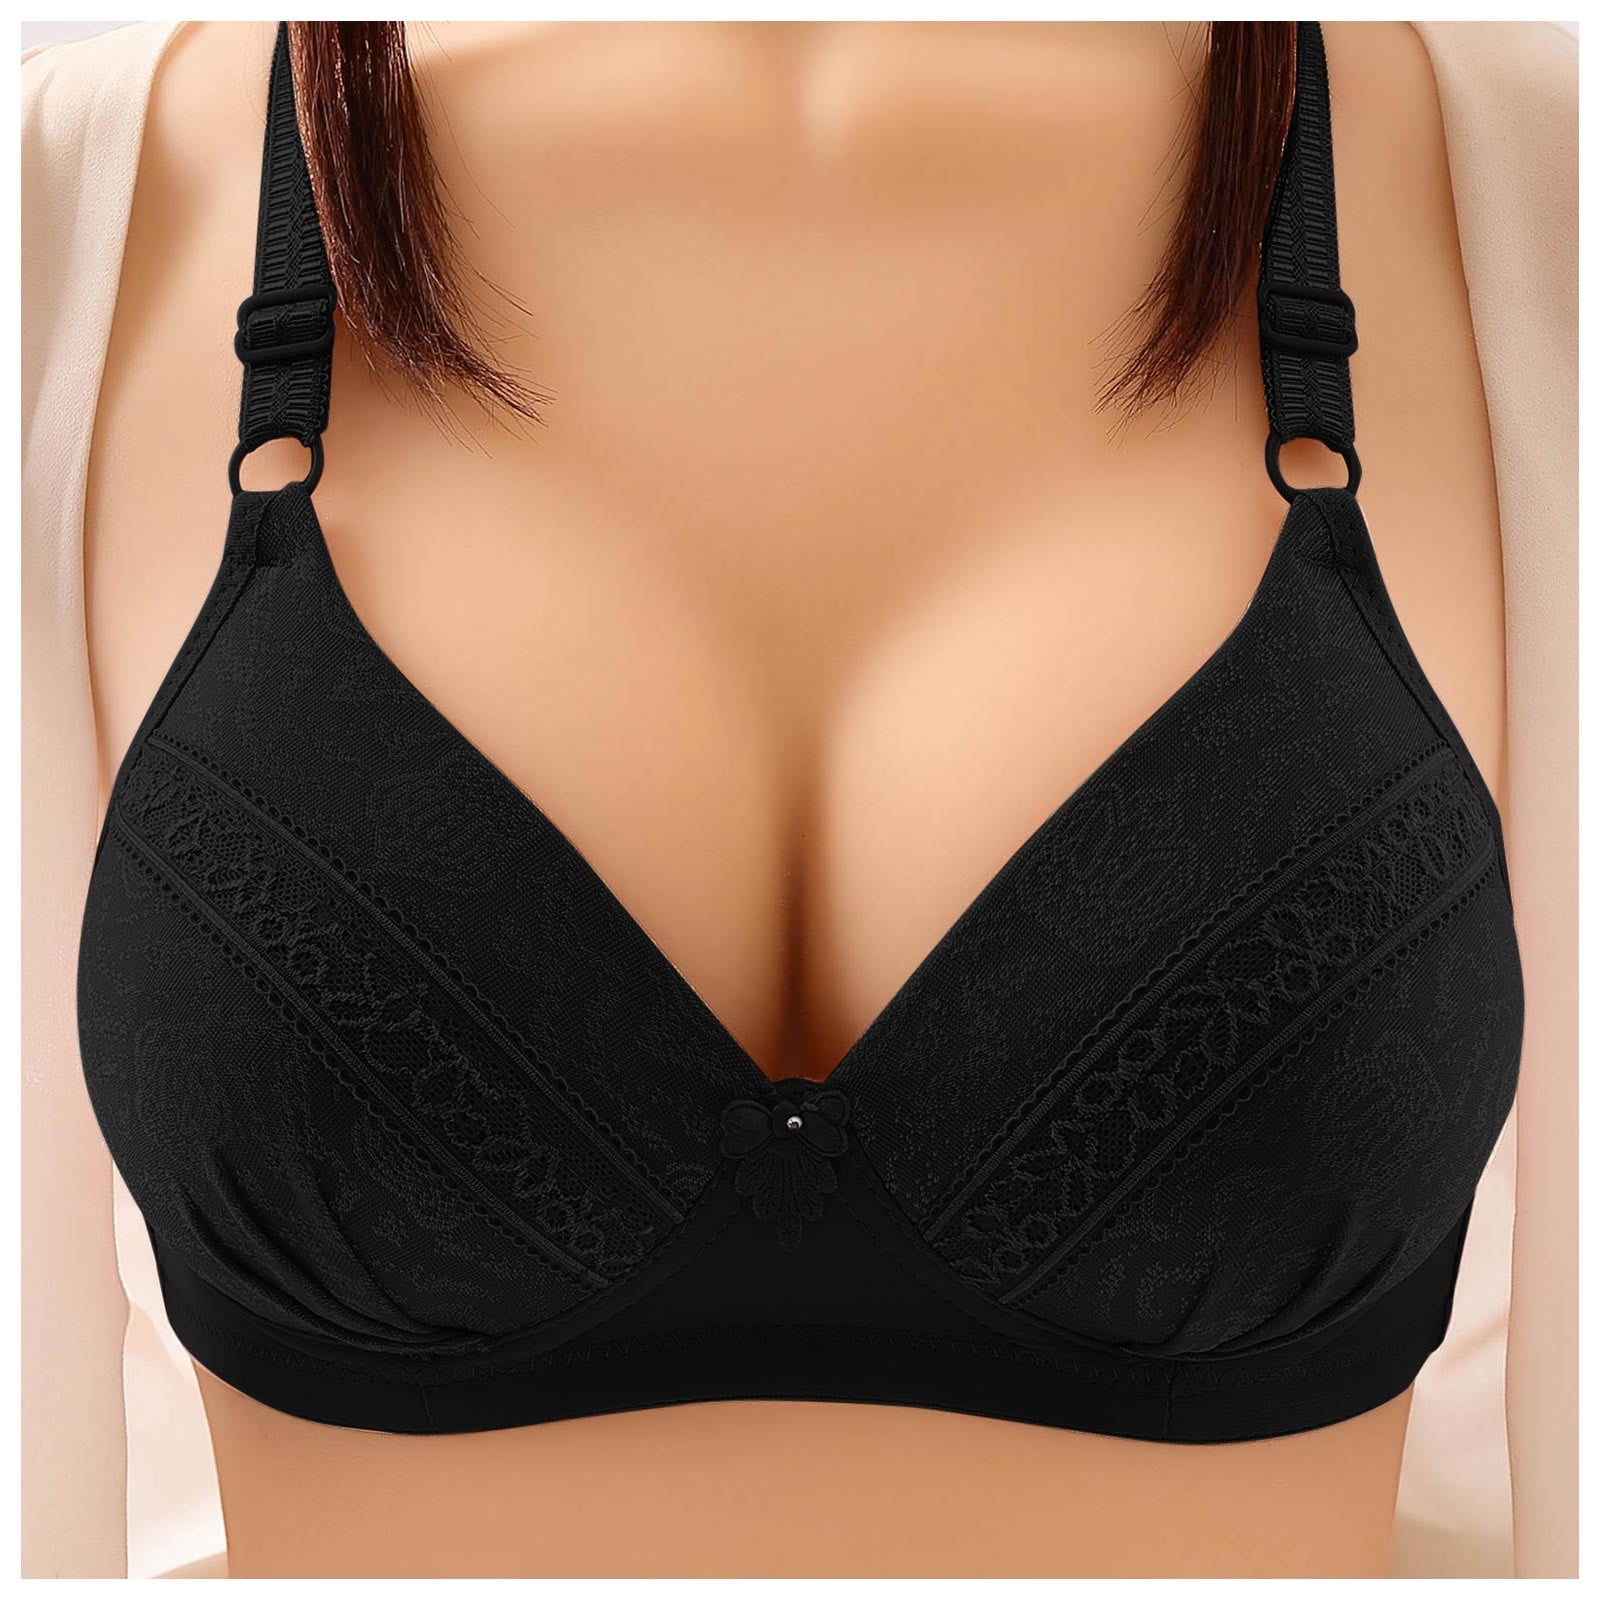 NHNKB Nursing Bra Women's Set Clothing Comfortable Tank Top for Women with  Back Strap and Chest Cushion, Thin Lace Bra without Steel Ring Primark Shop  Online Sports Bra Strong Hold Sports Bra 